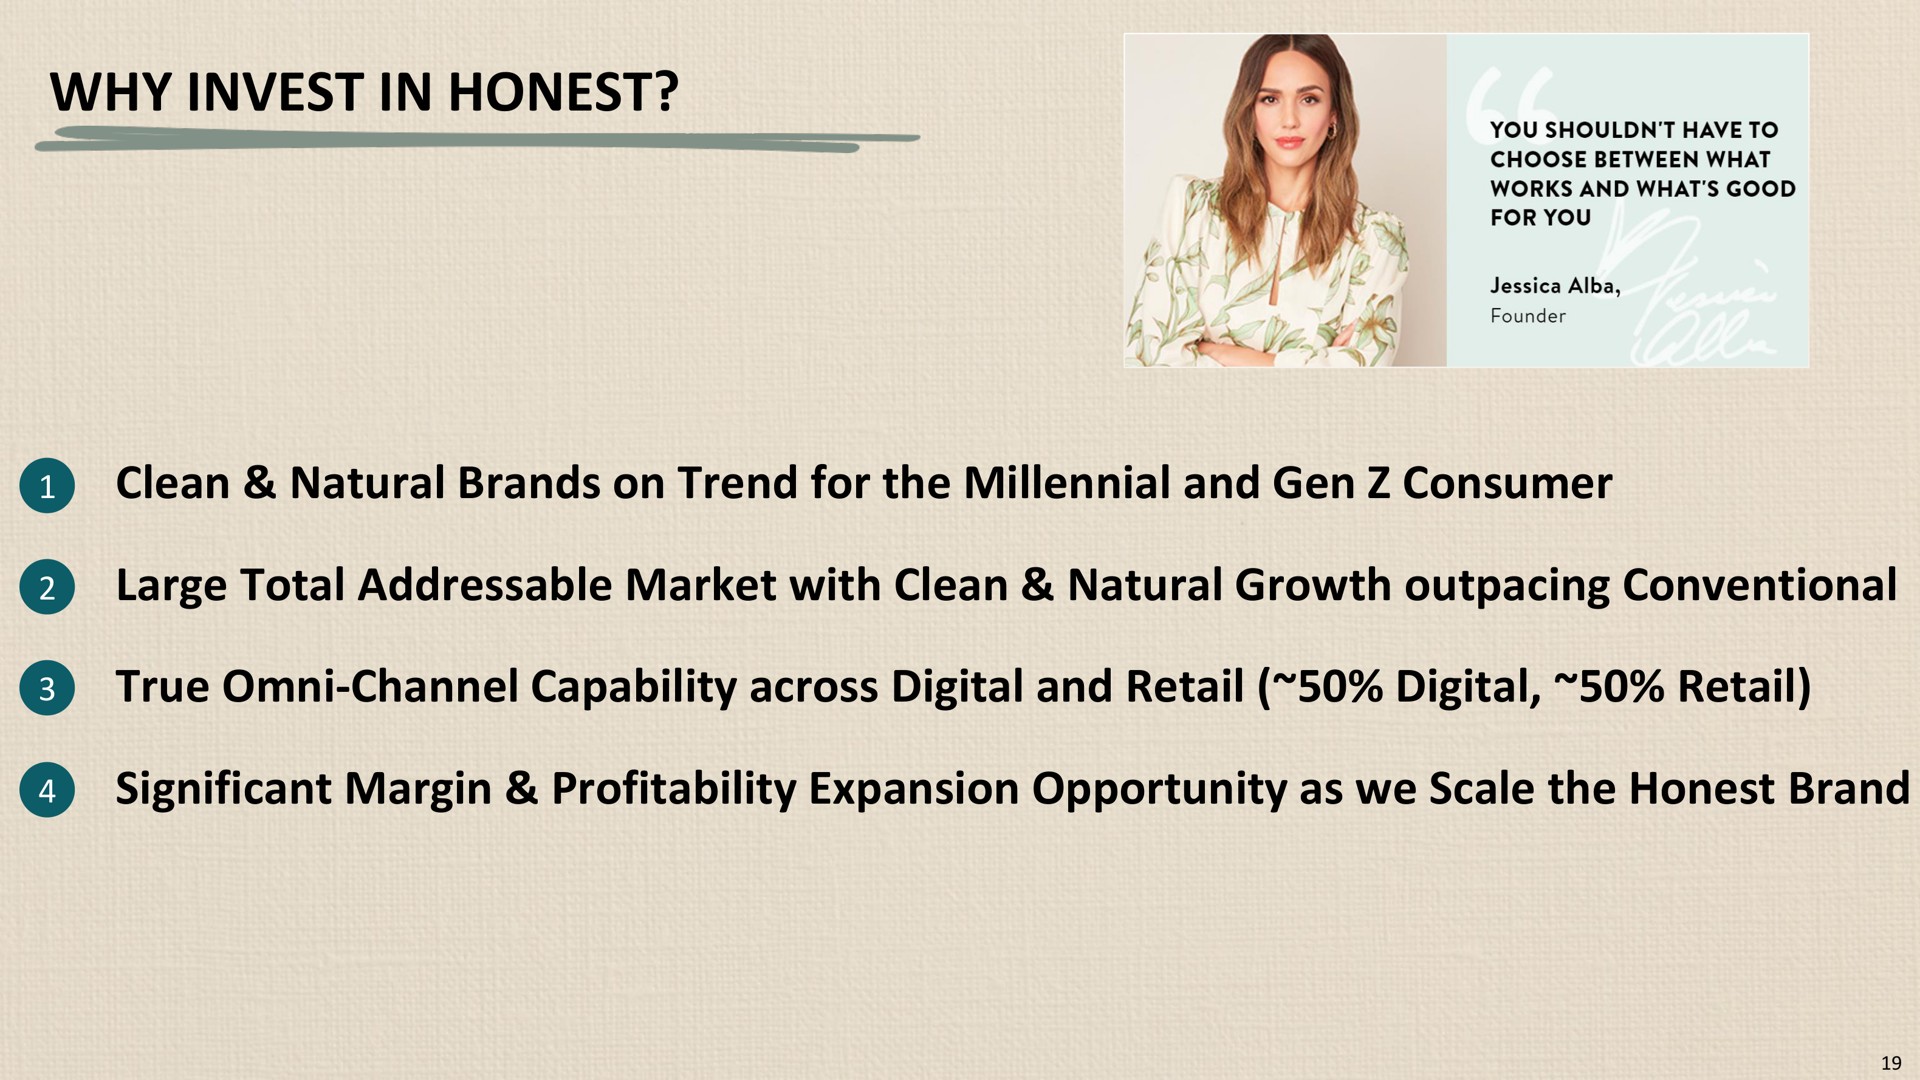 why invest in honest significant margin profitability expansion opportunity as we scale the brand | Honest